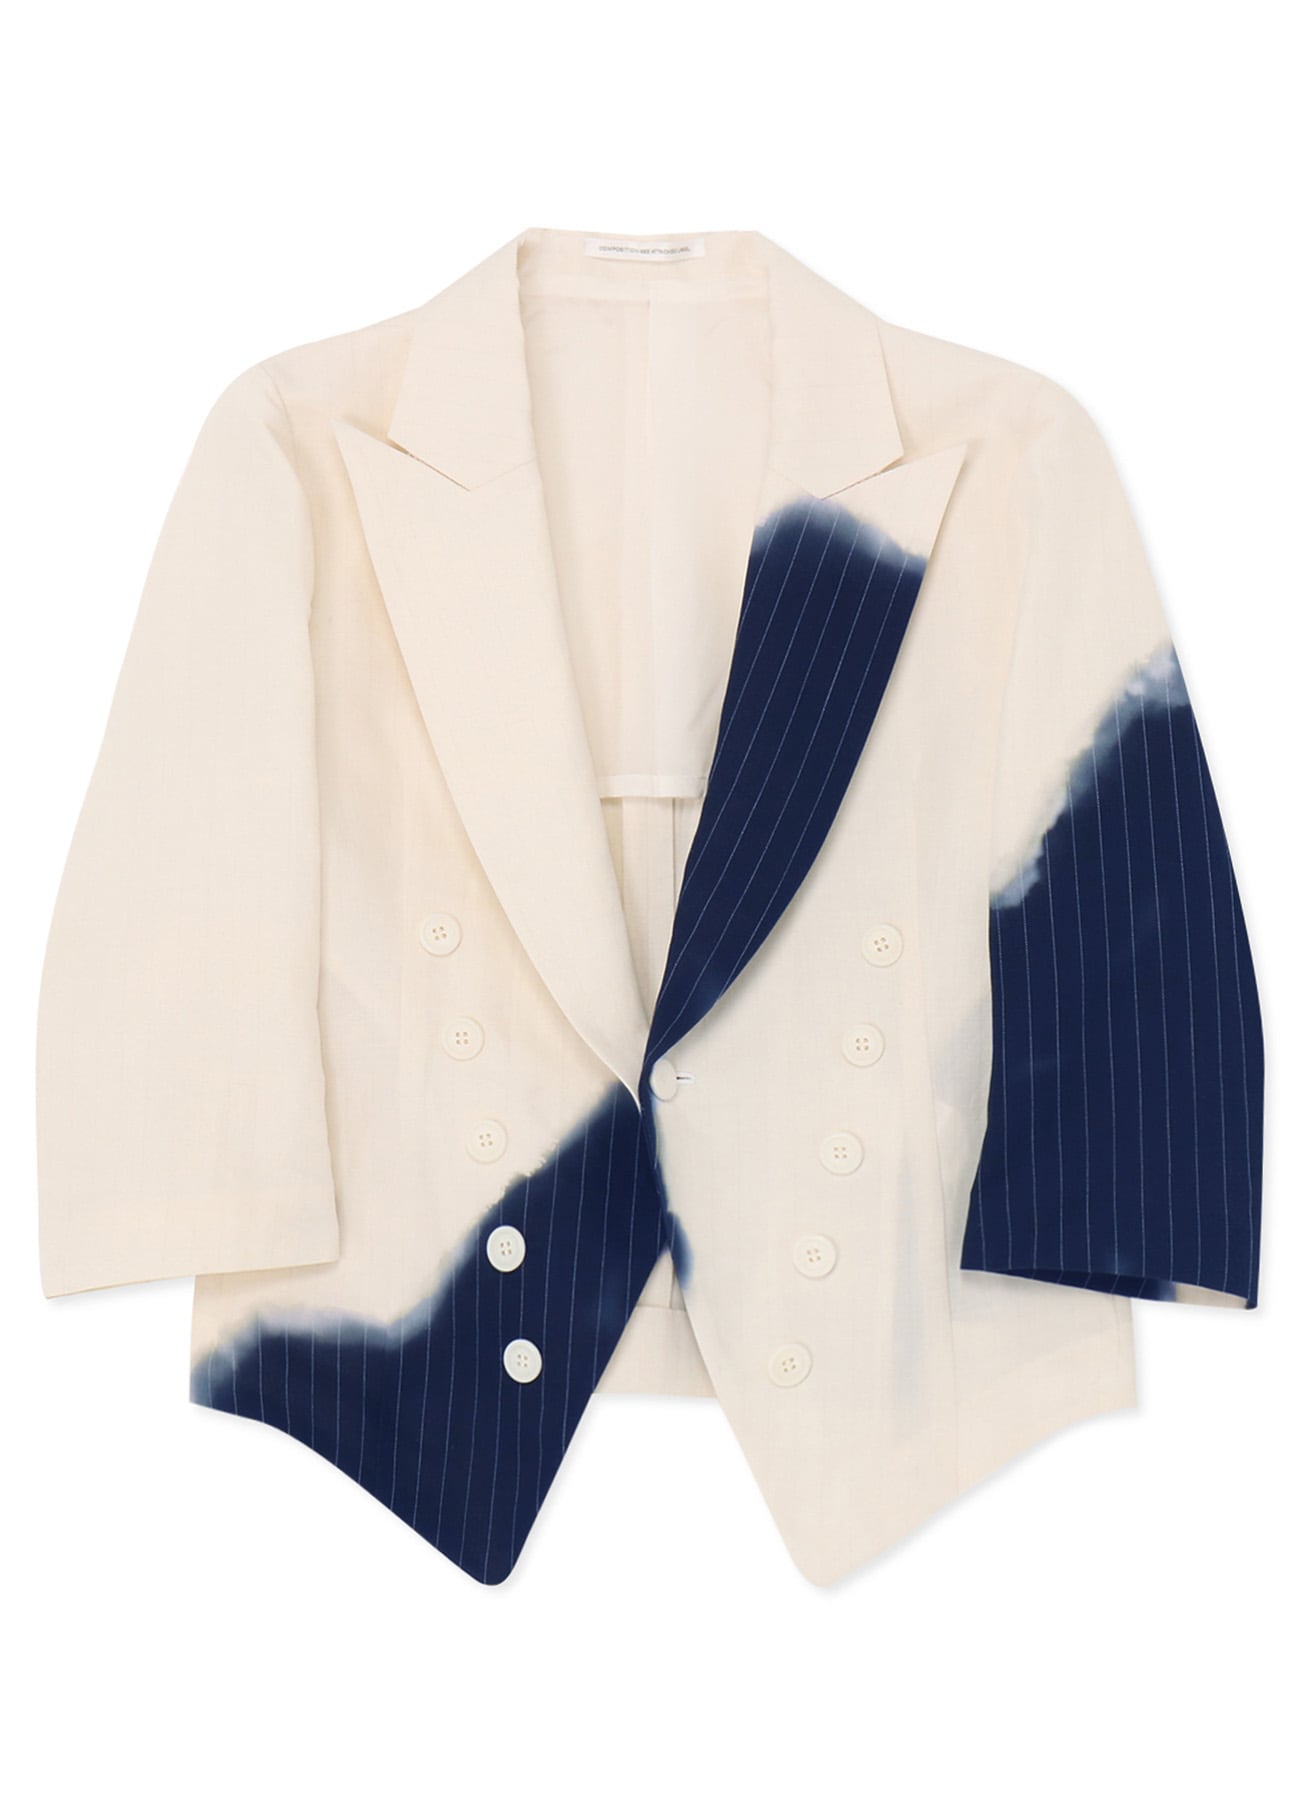 LINEN/COTTON SWALLOWTAIL JACKET WITH PARTIAL PINSTRIPE PATTERN(S 